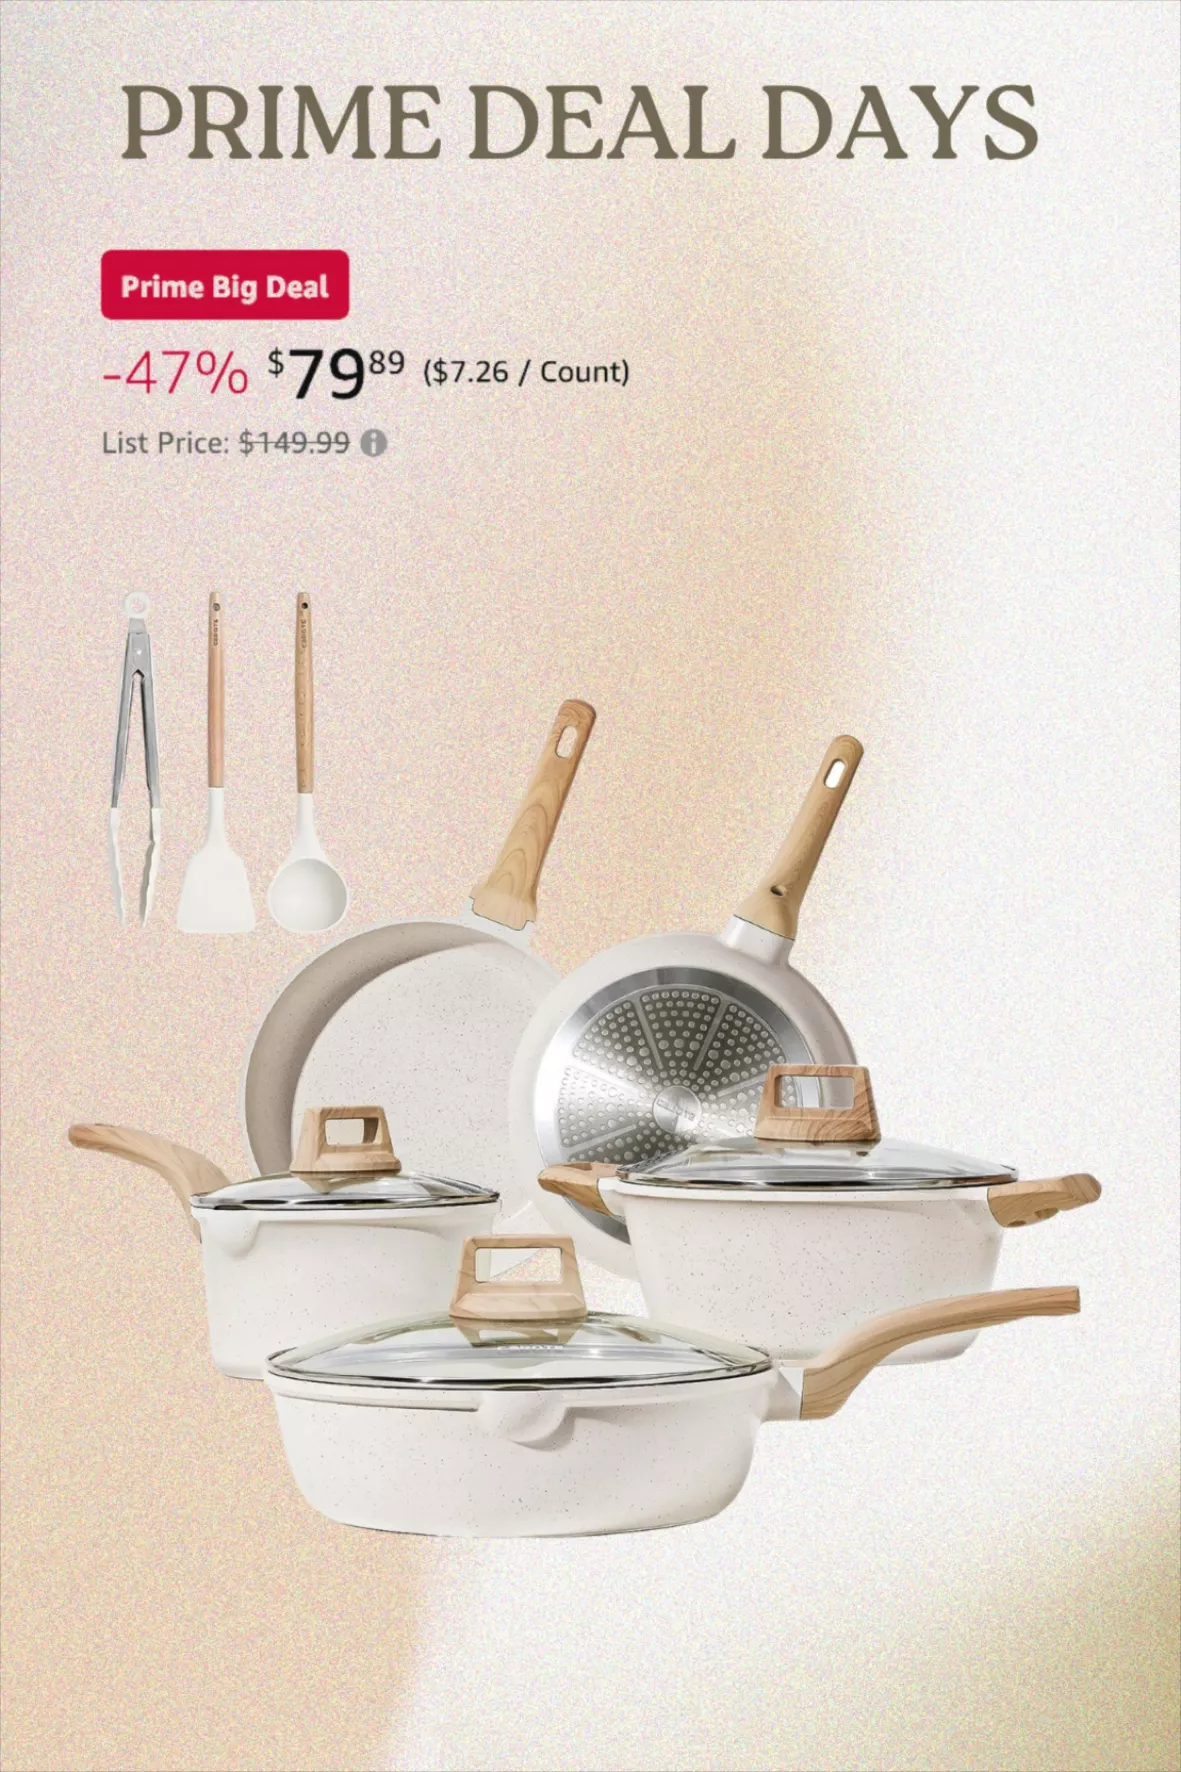 CAROTE Pots and Pans Set Nonstick, White Granite Induction Kitchen